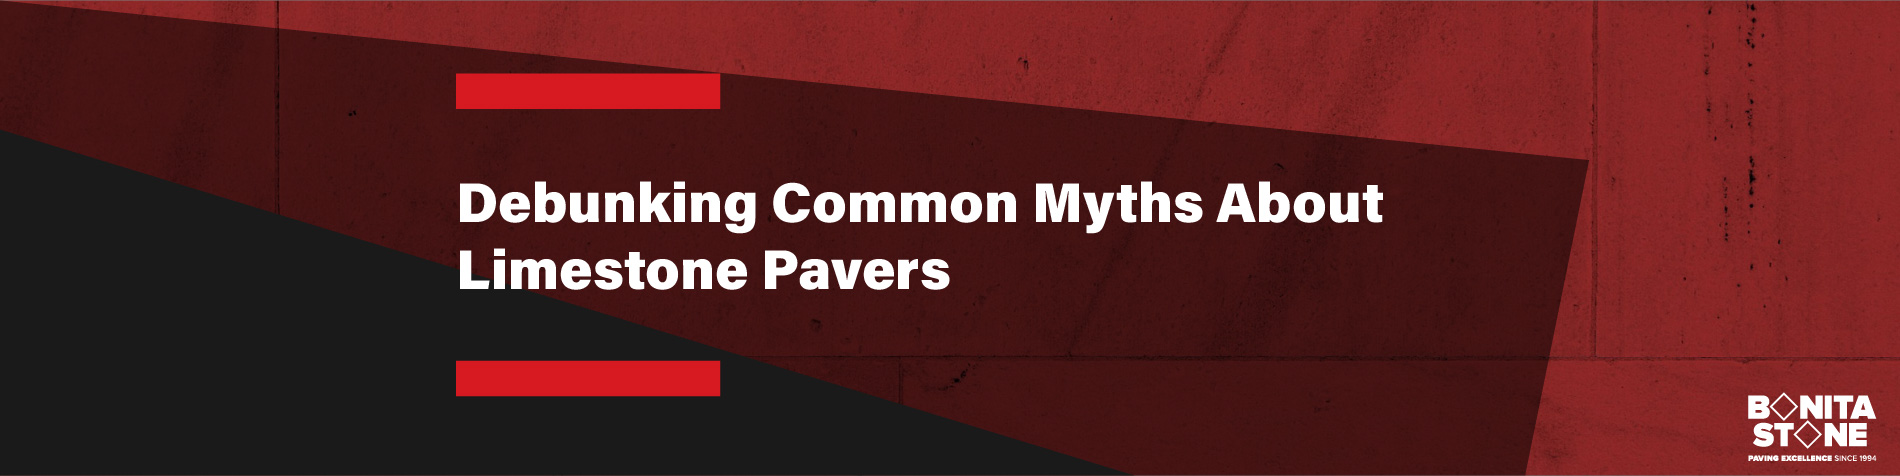 debunking-common-myths-about-limestone-pavers_2